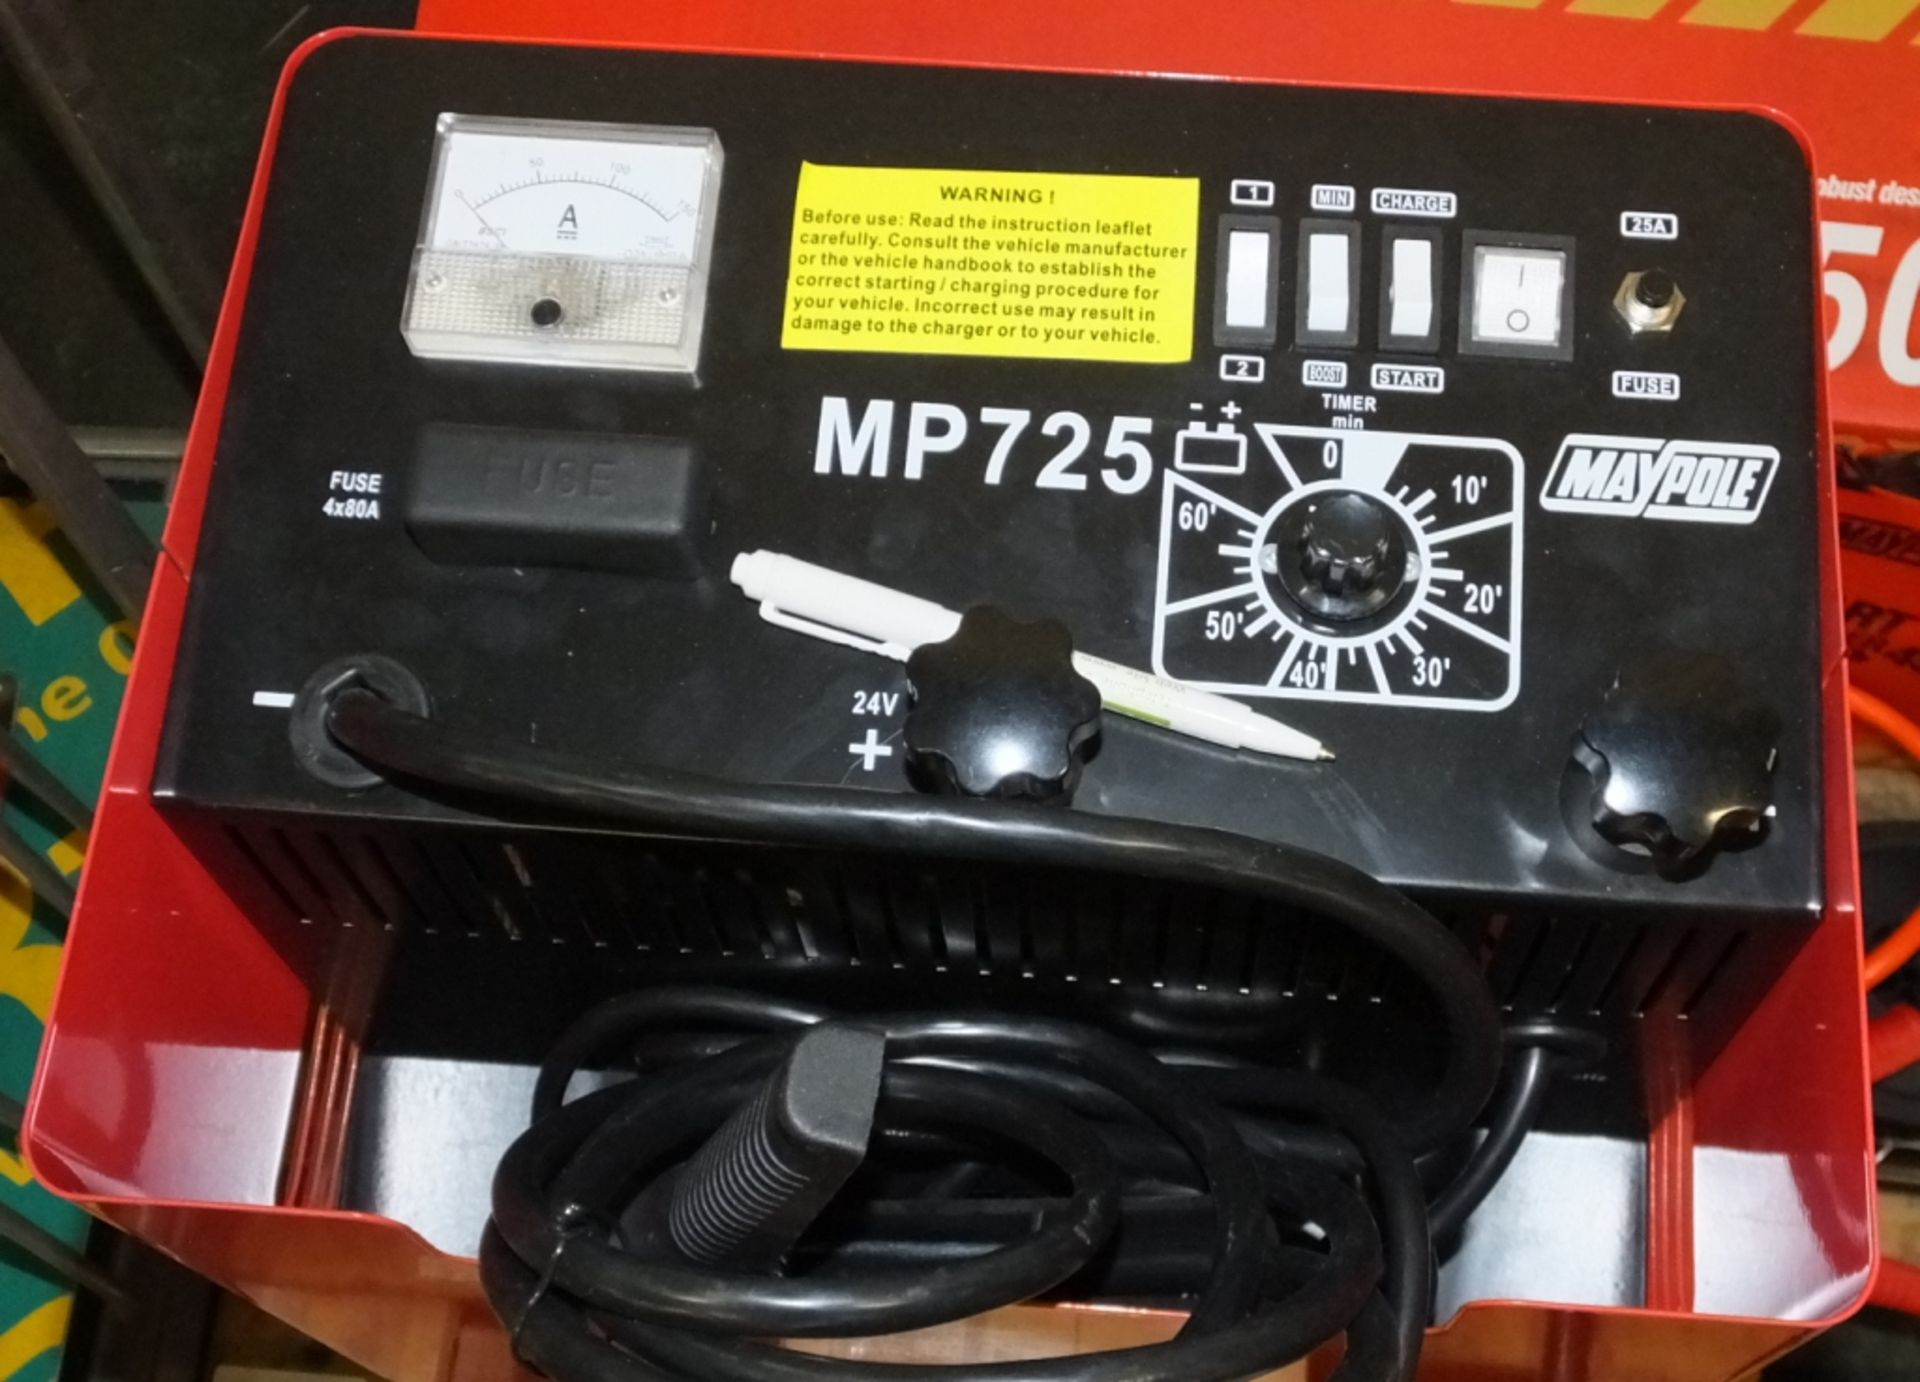 Maypole Start Charger 450 MP725 - Please note there will be a loading fee of £5 on this it - Image 3 of 4